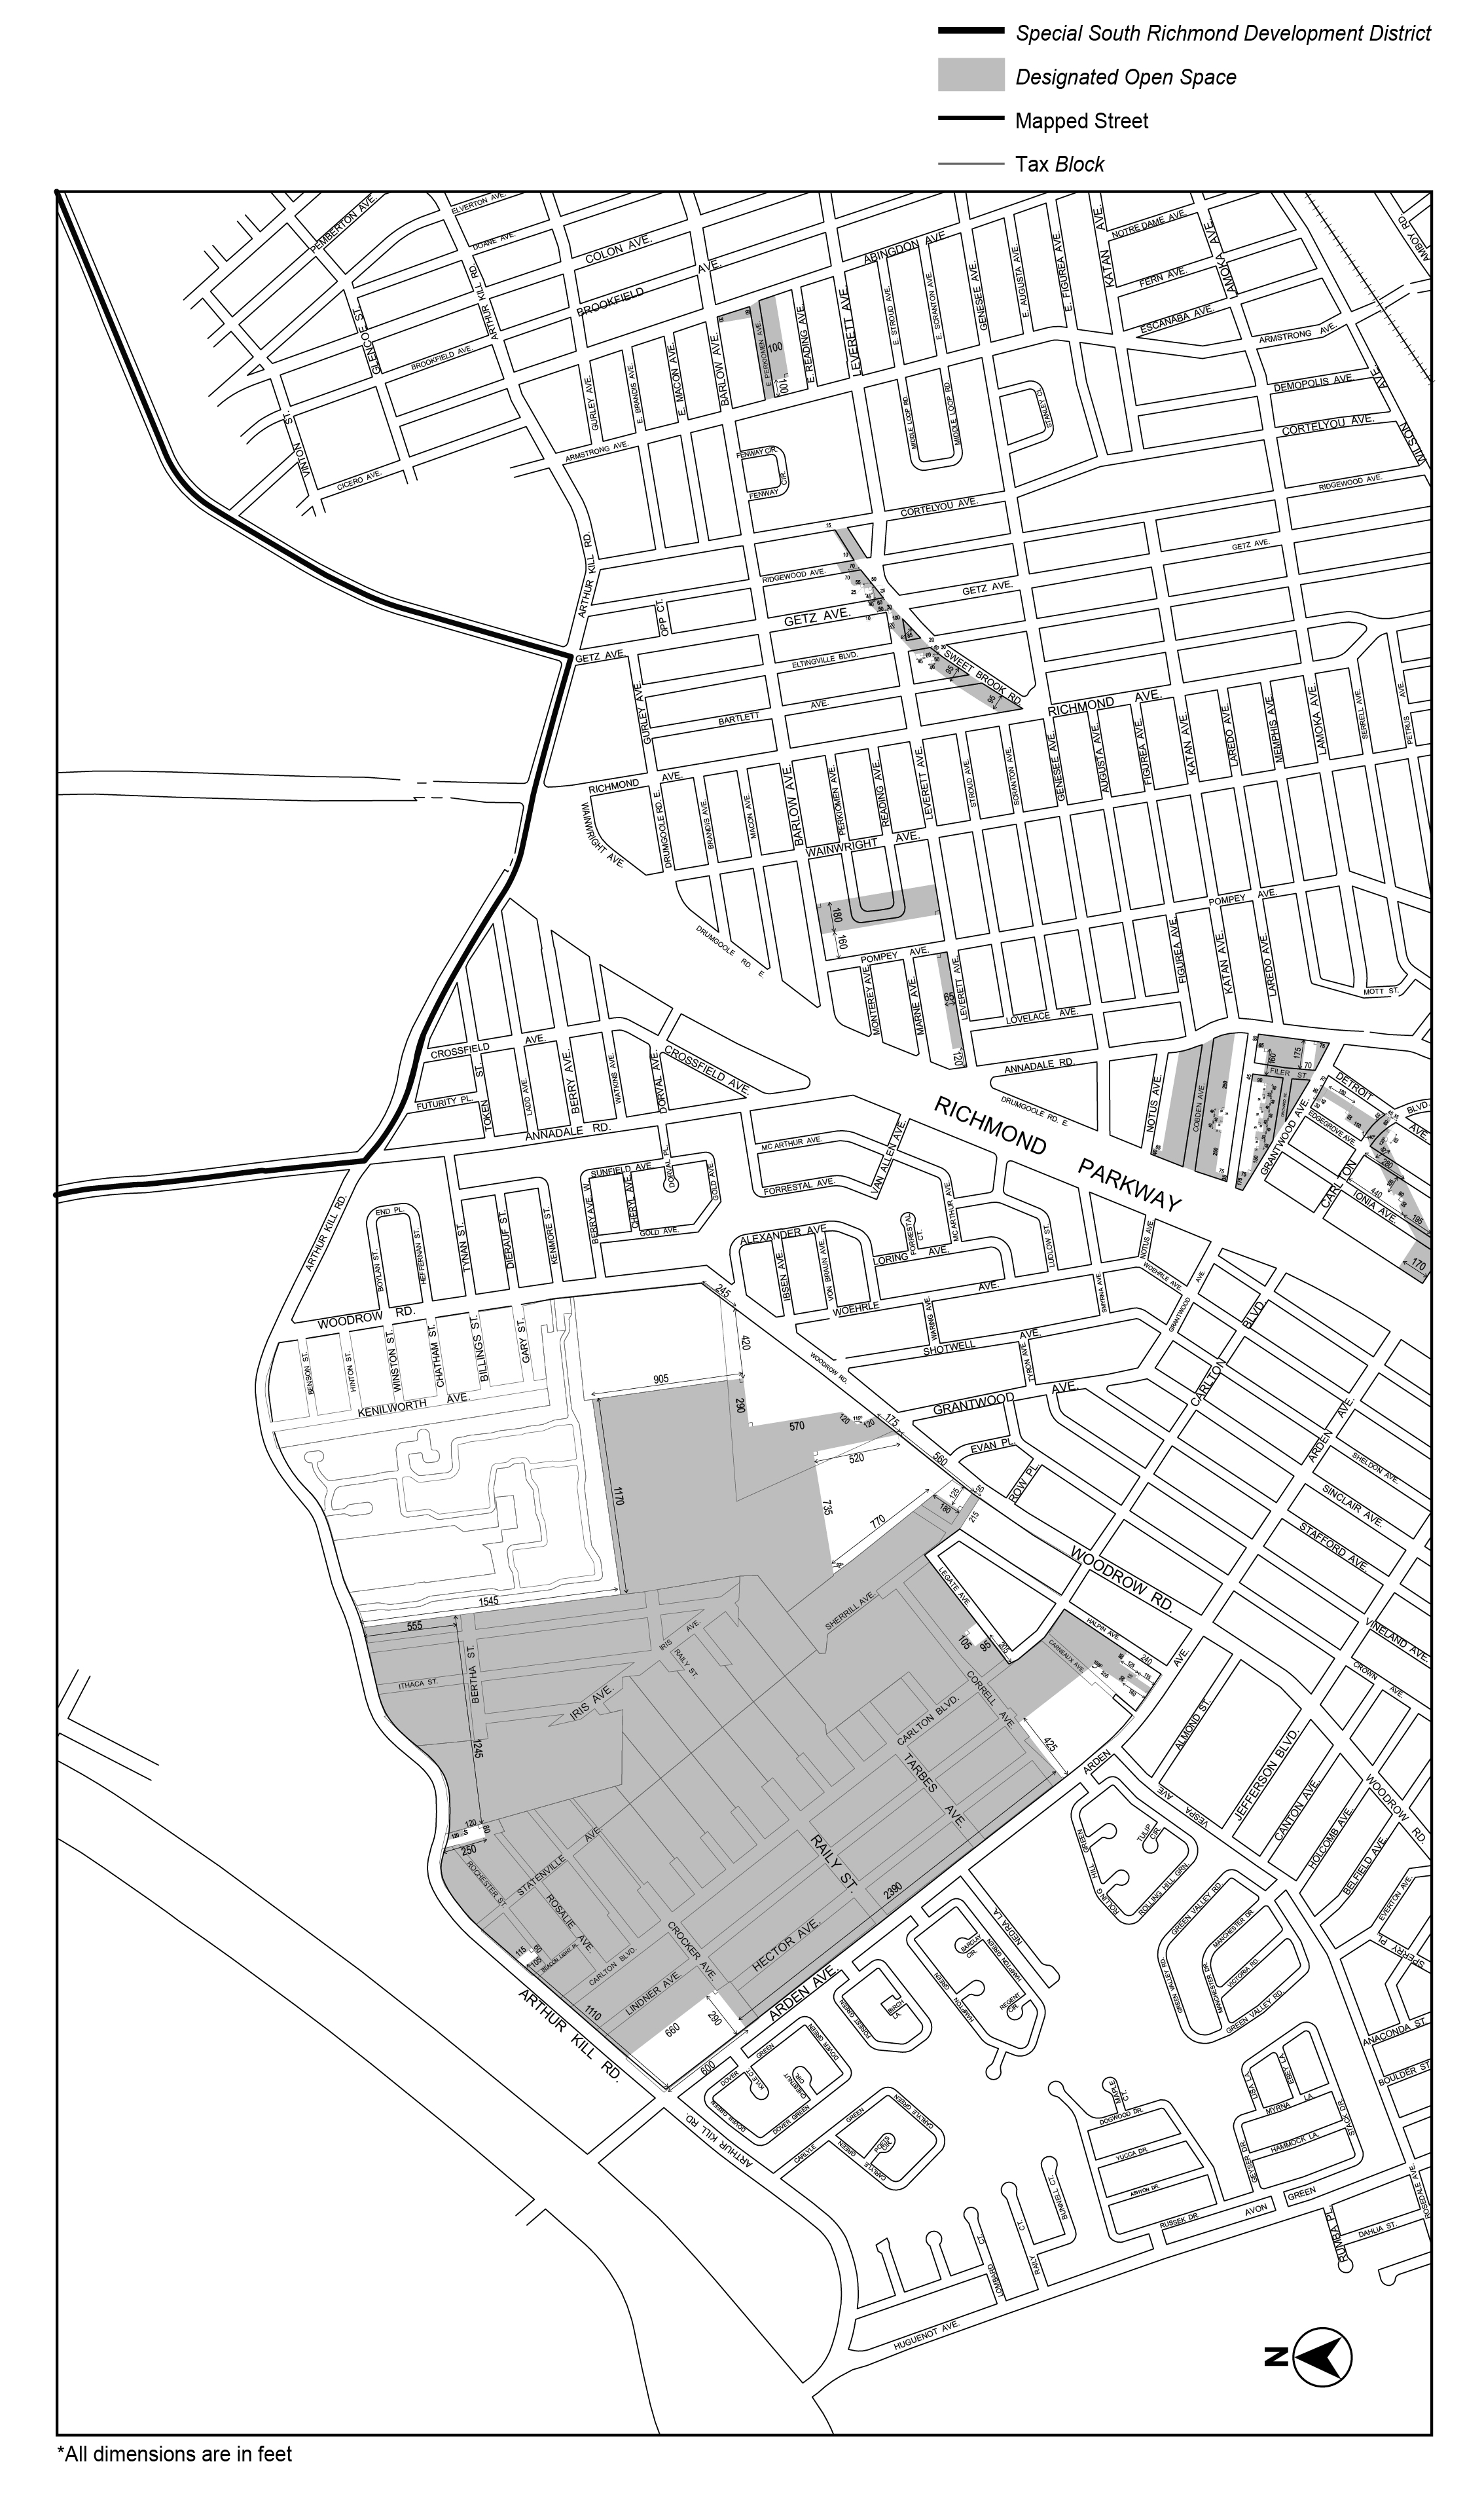  Article X, Chapter 7, Appendix A, Map 3.5 amended per N 230112 ZRR (South Richmond Zoning Relief) adopted by City Council 11/2/23